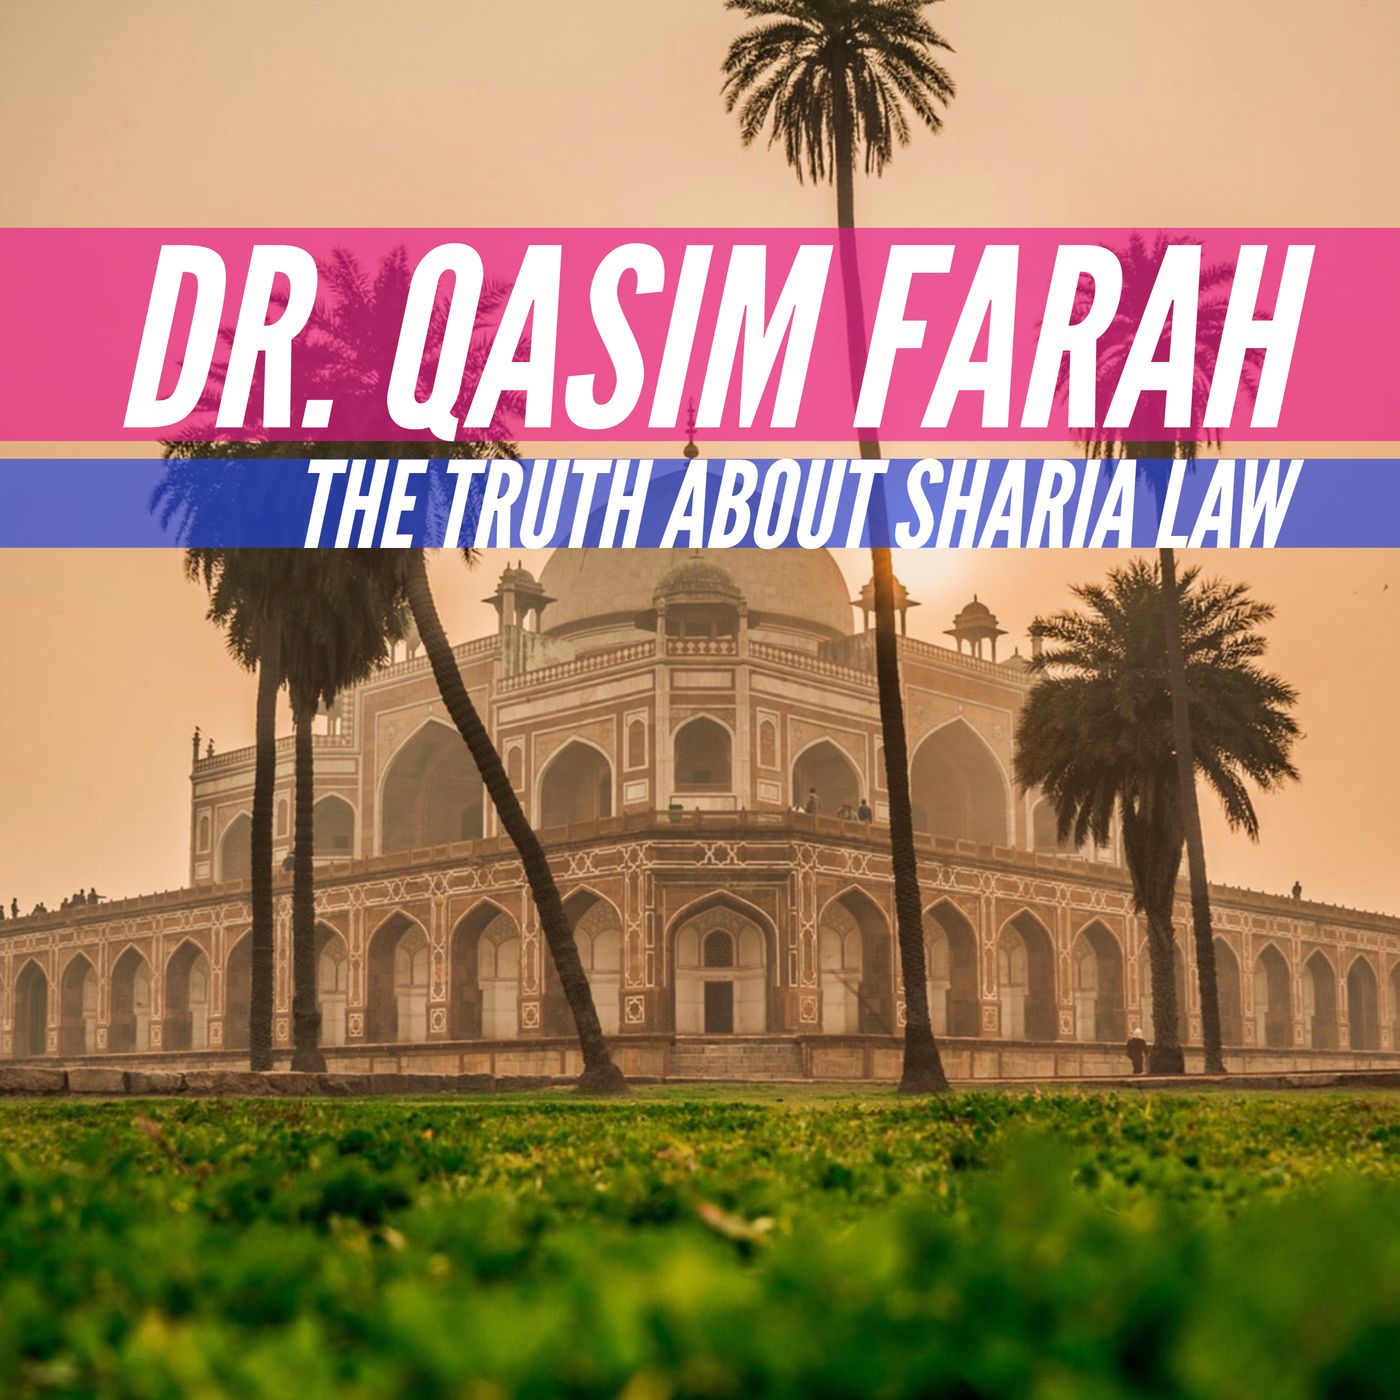 The Truth about Sharia (Law) with Dr. Qasim Farah